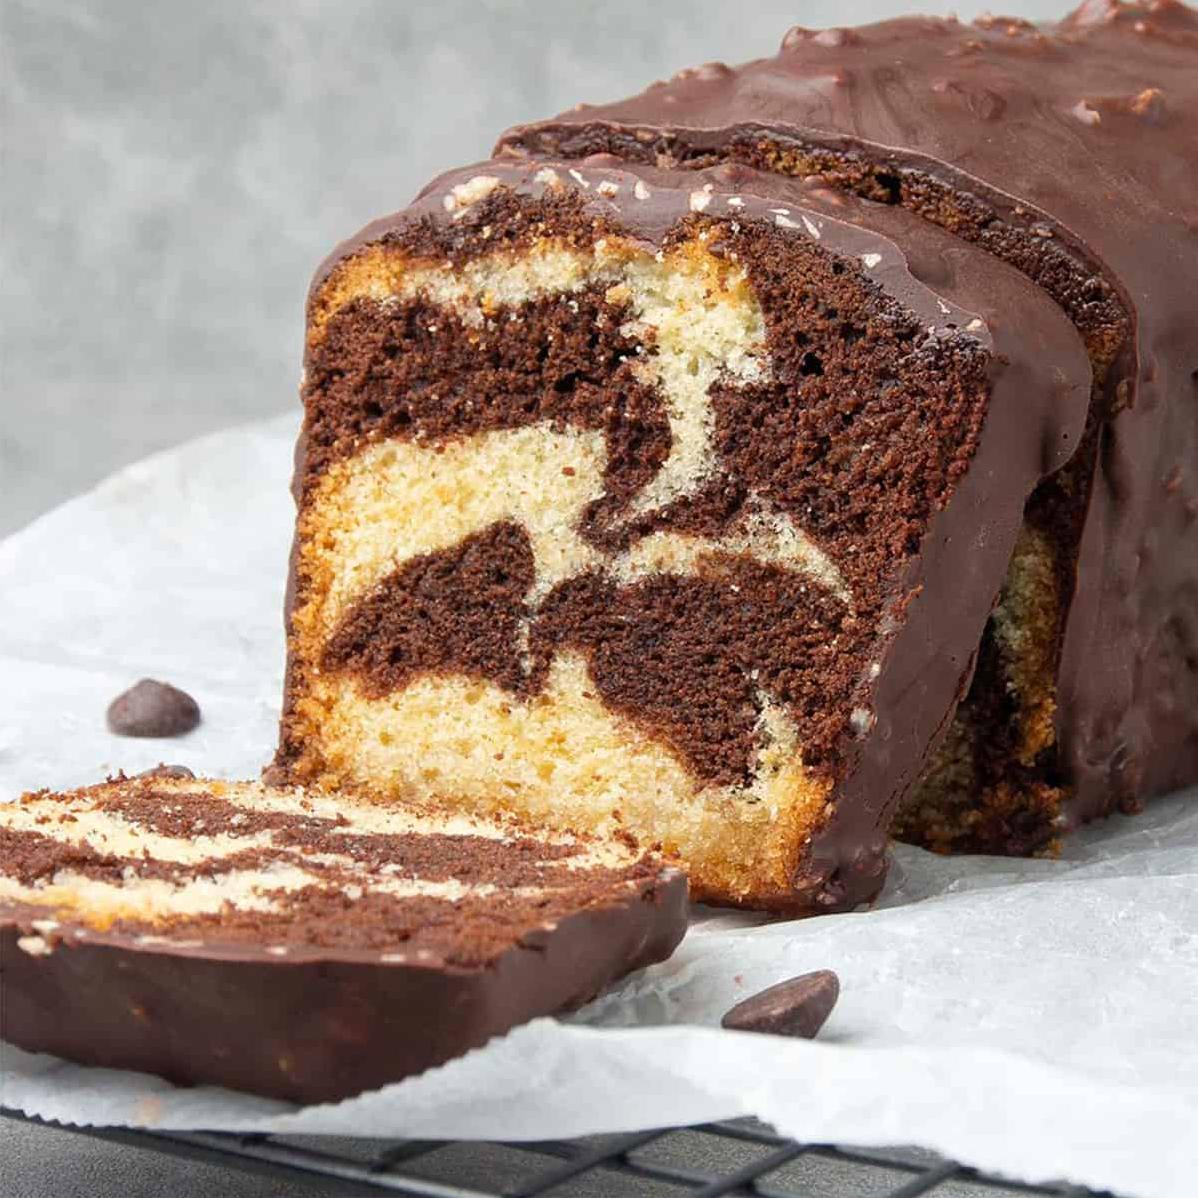  Indulge in this irresistible cake that is perfect for any occasion.